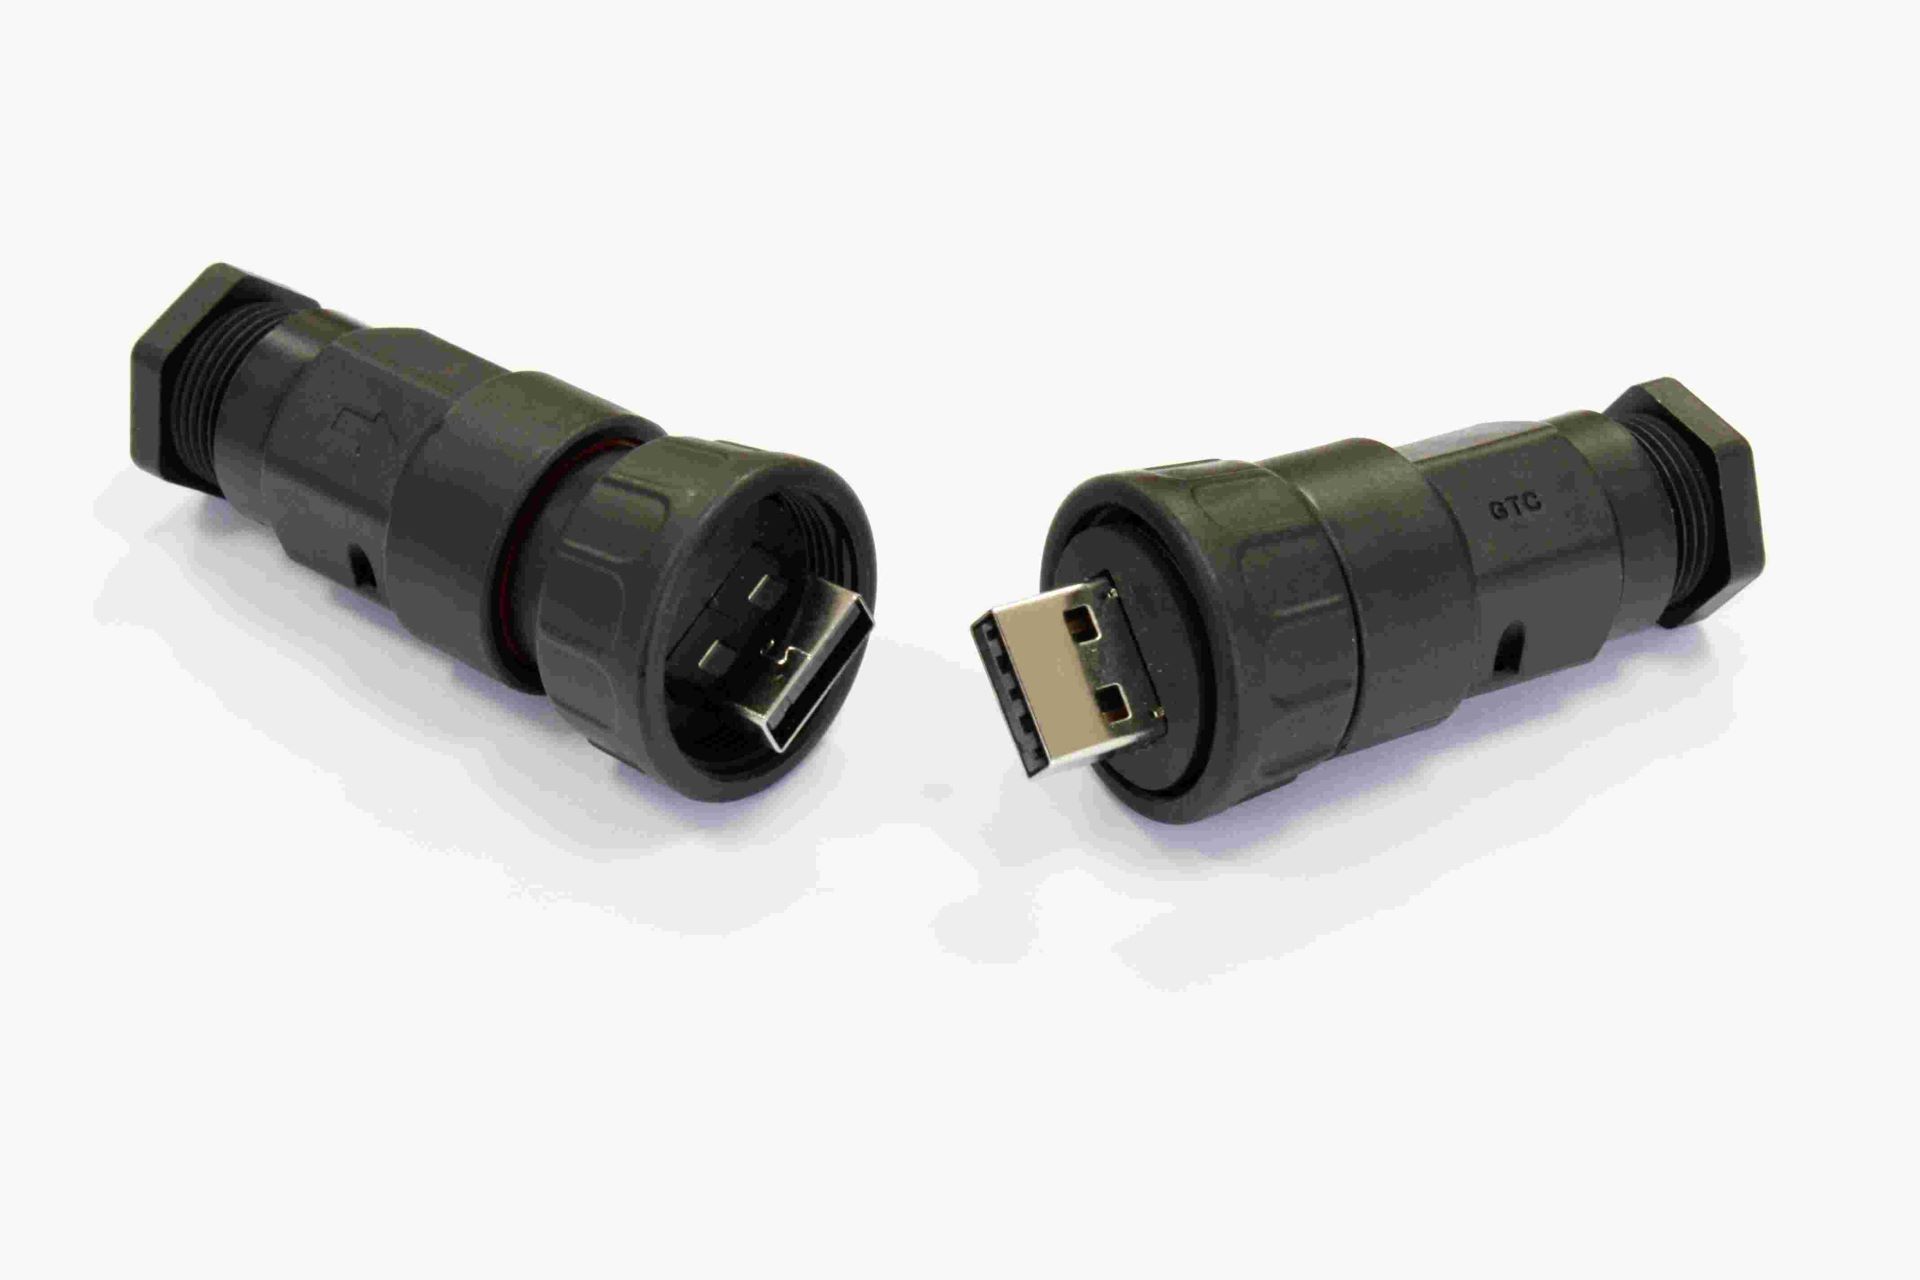 2015-11-02 GTC is glad to release its new Plastic USB2.0 filed installable type connector.